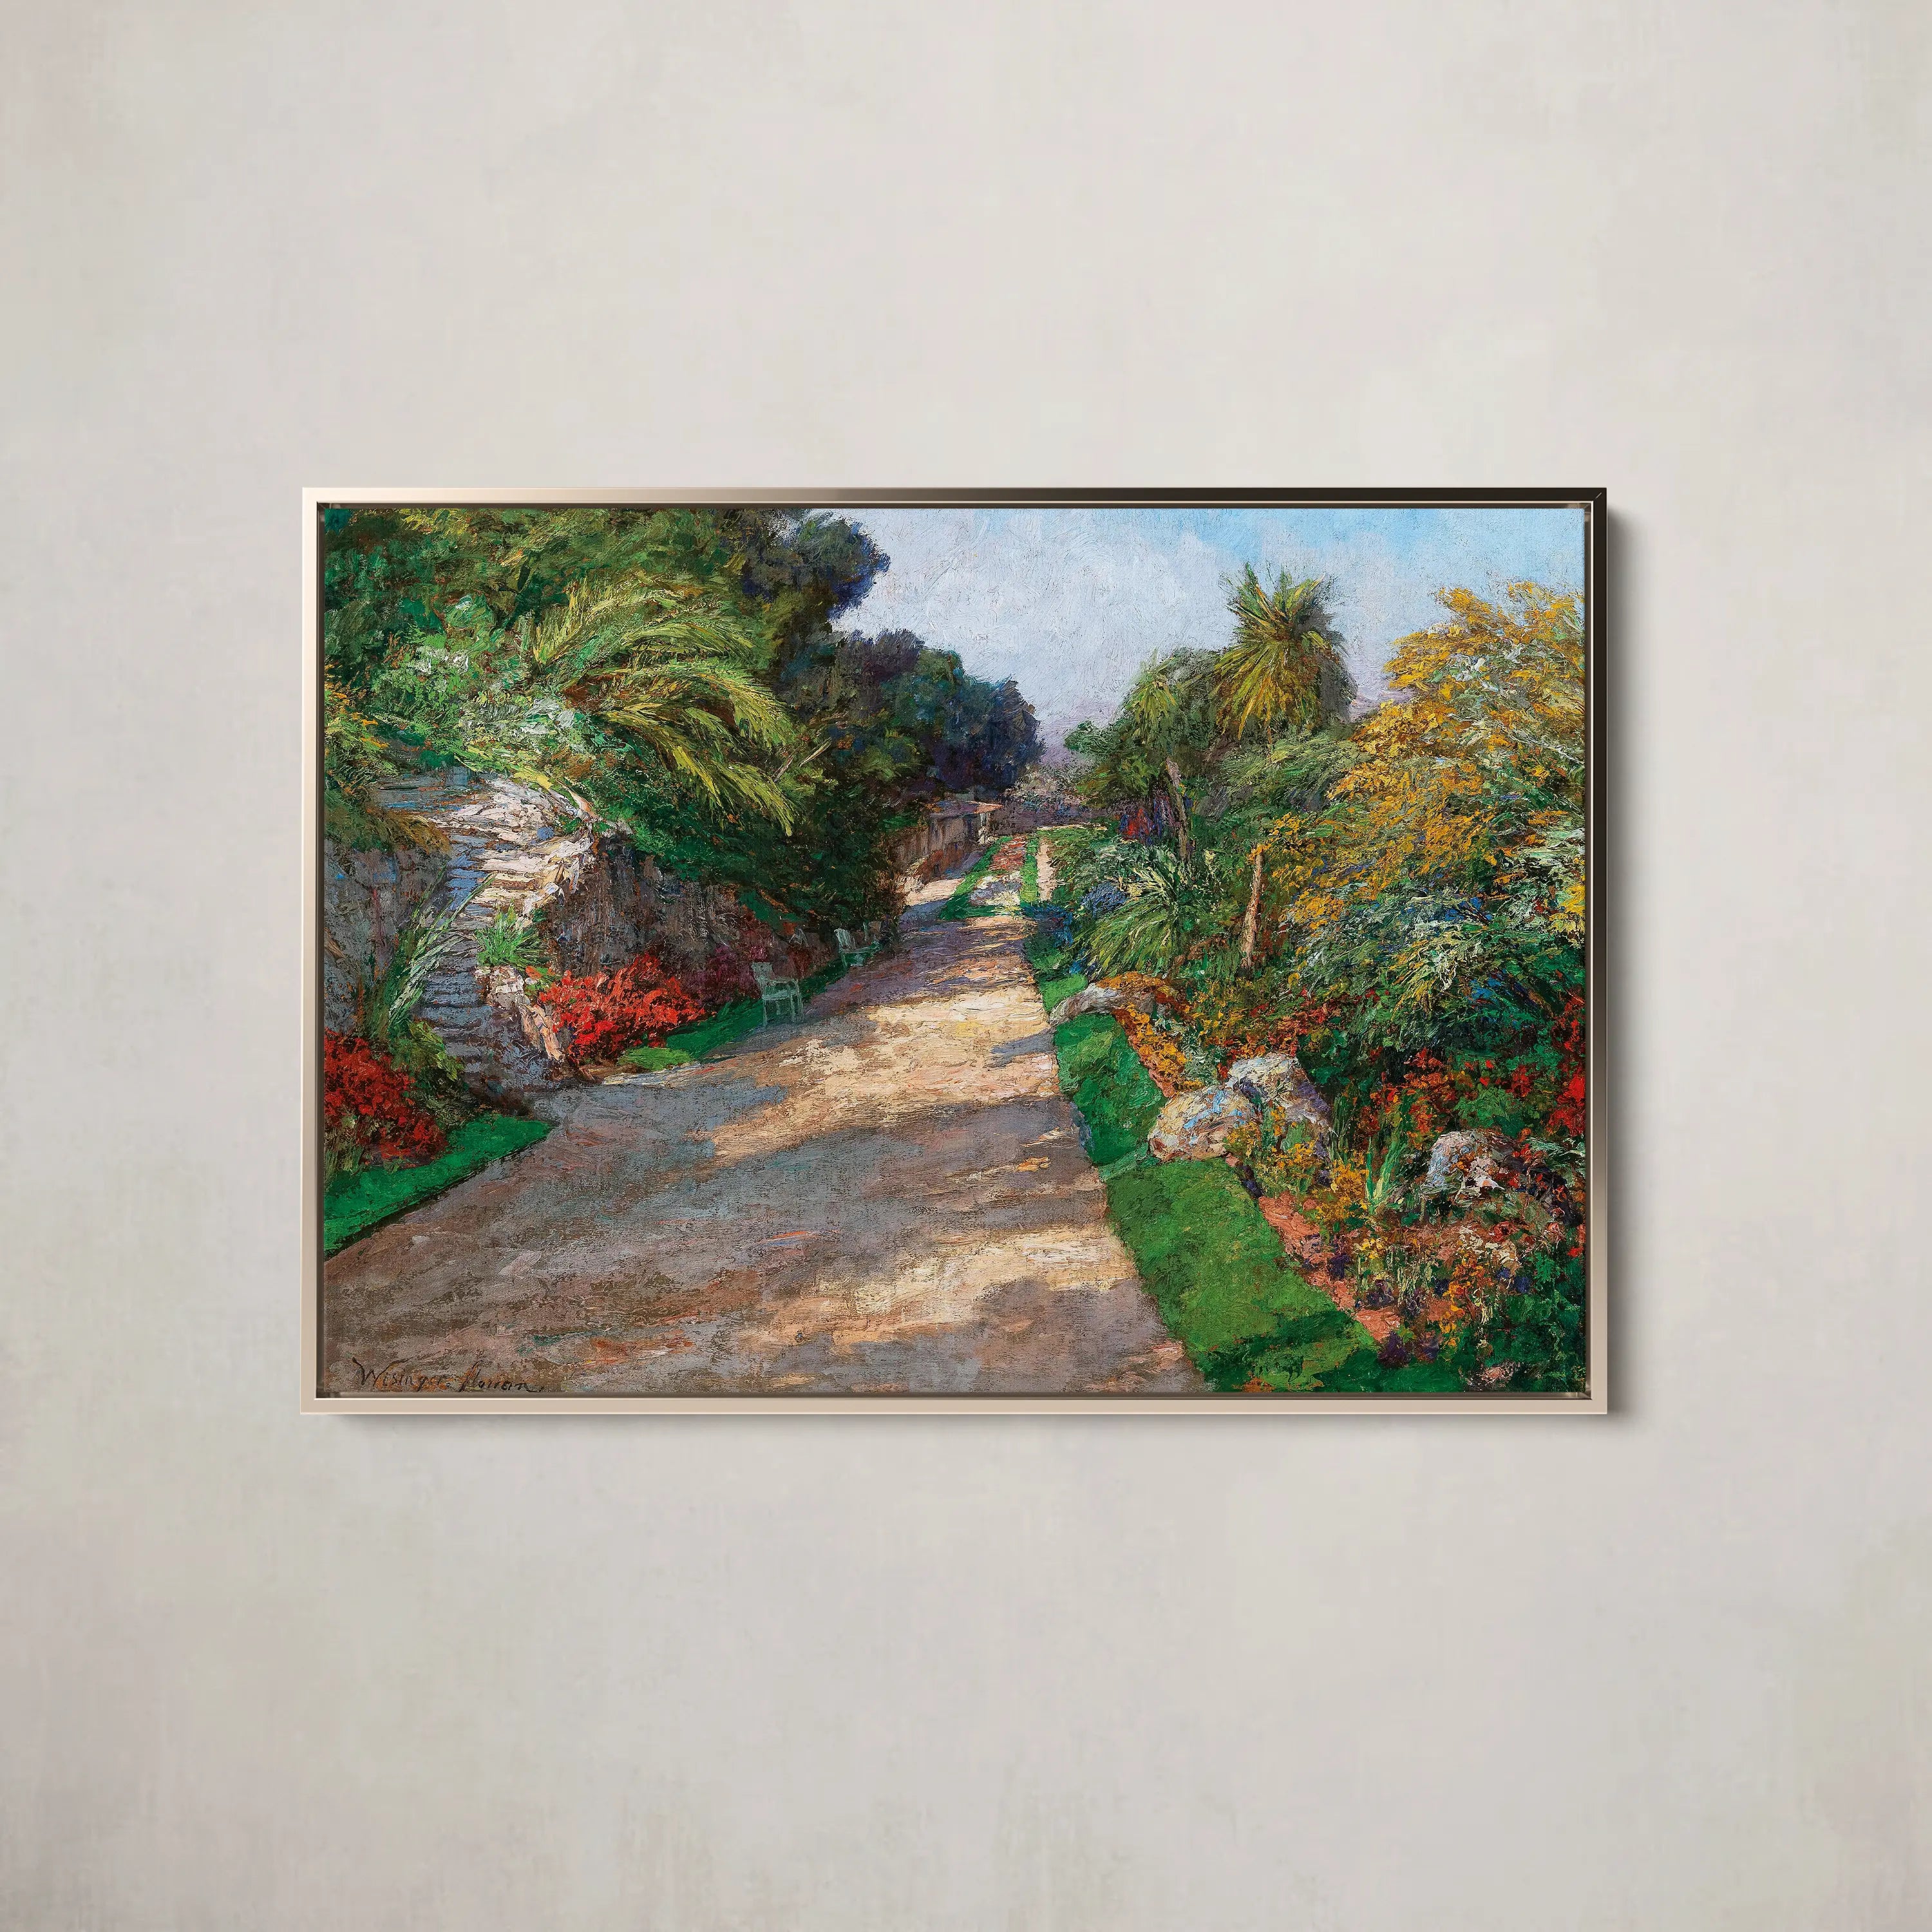 A Gardenpath Of The Riviera Palace Hotels Bei Monte Carlo (1906)